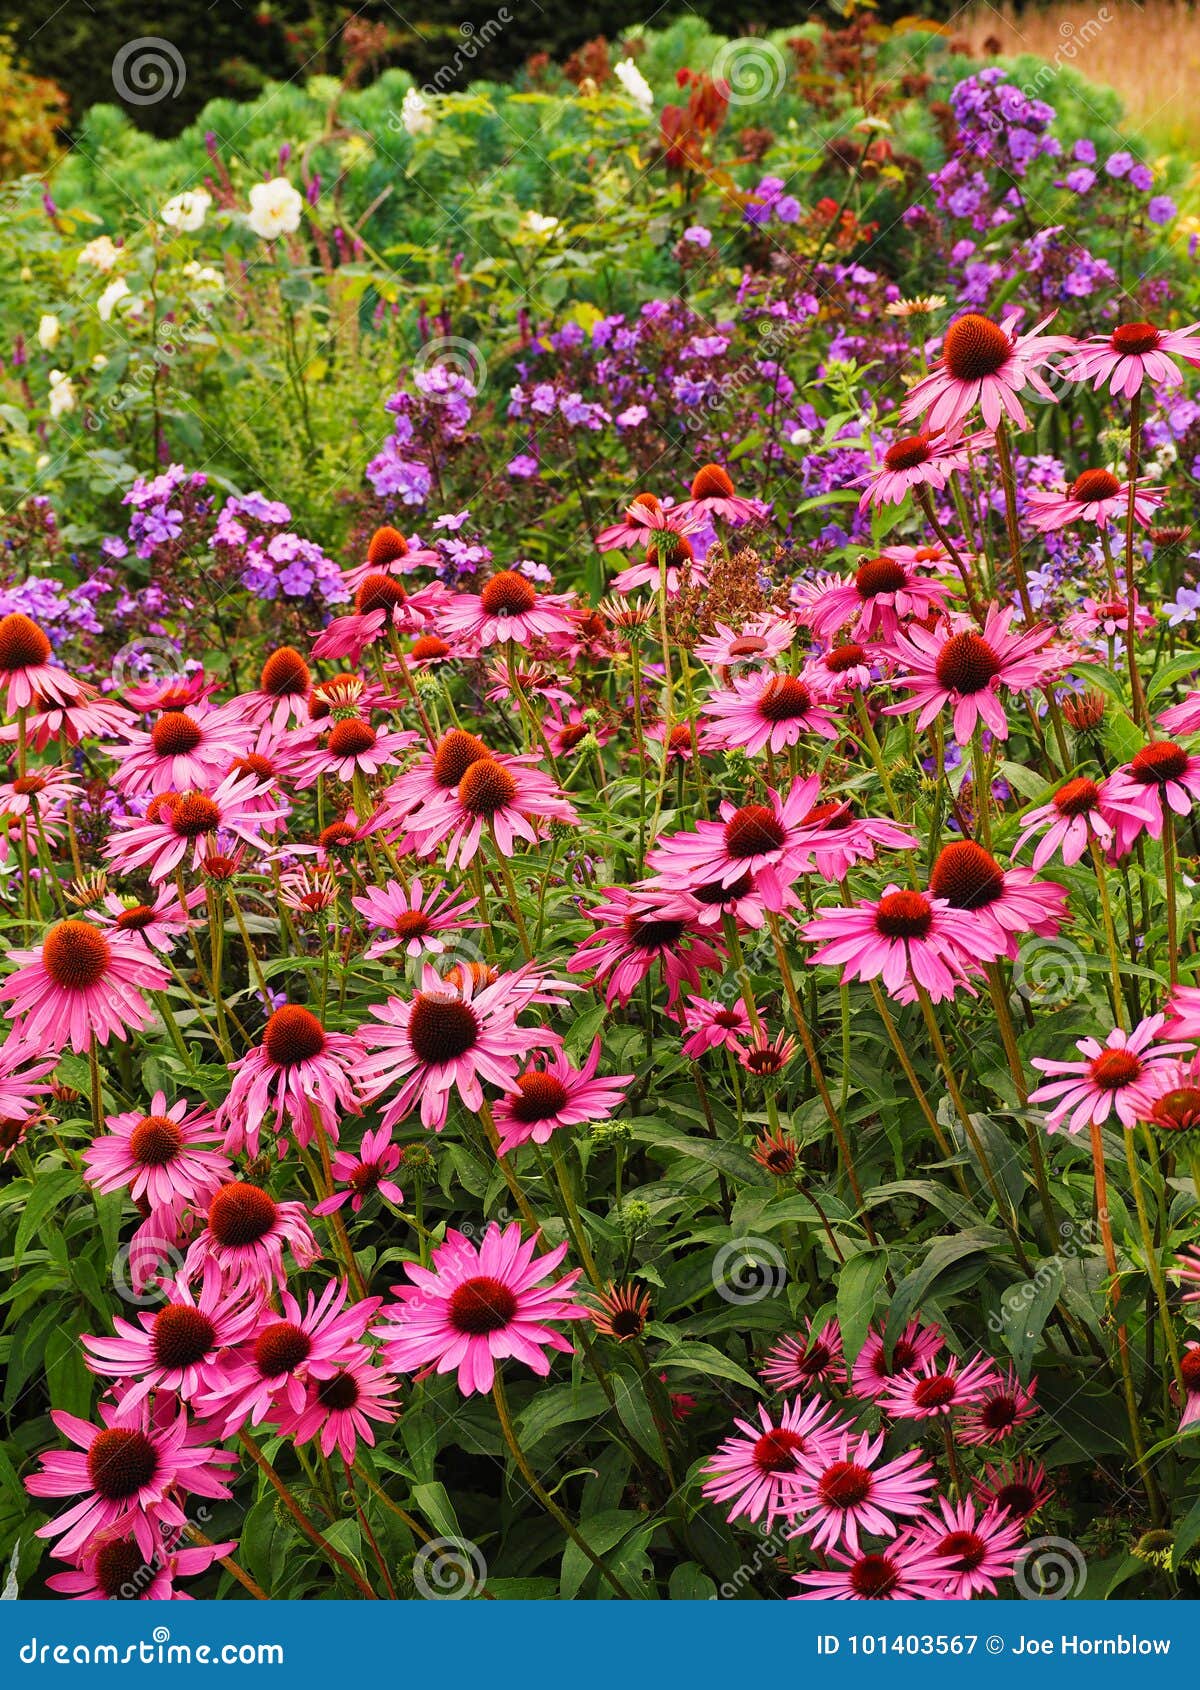 Pink Echinacea Flowers At Front Of English Cottage Garden Border